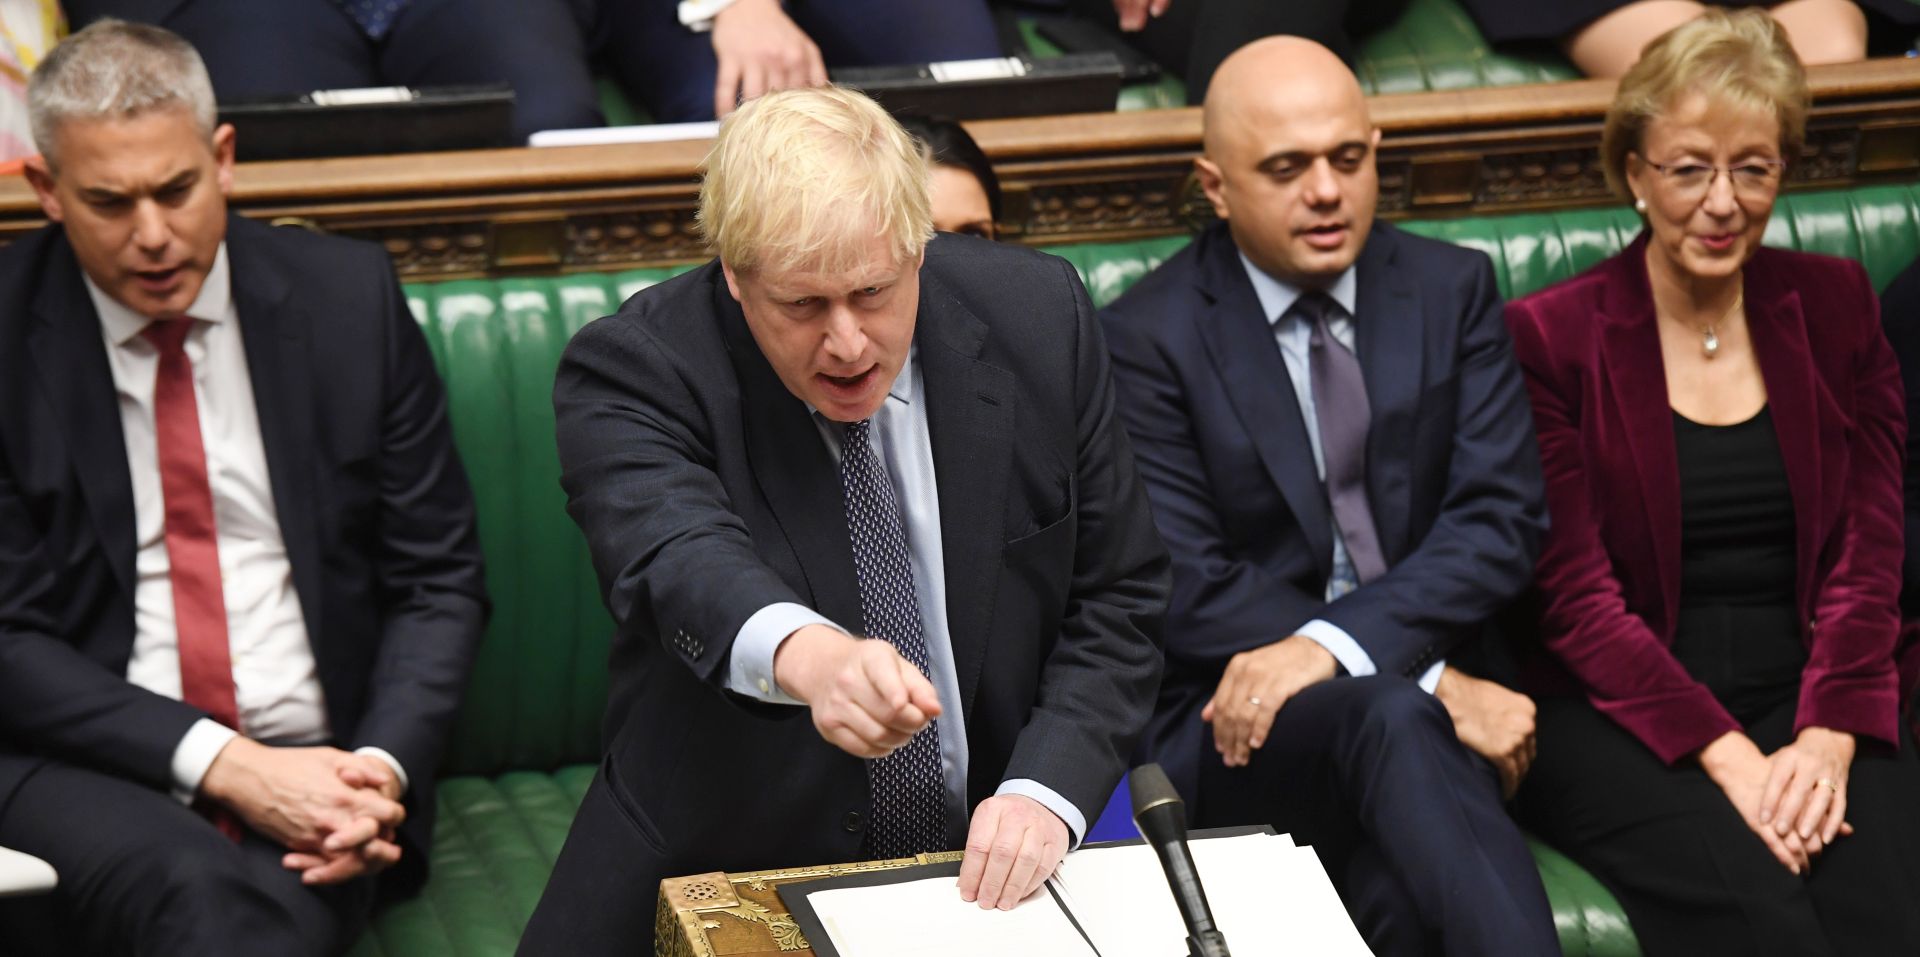 epa07932972 A handout still image available by the UK Parliament shows British Prime Minister Boris Johnson addressing MPs during a debate on the revised Brexit deal at the House of Commons in London, Britain, 19 October 2019. The European Union (EU) and the British government reached a tentative deal on Brexit that must be ratified in a vote by the UK Parliament.  EPA/UK PARLIAMENT / JESSICA TAYLOR MANDATORY CREDIT: UK PARLIAMENT / JESSICA TAYLOR - Images must not be altered in any way. HANDOUT EDITORIAL USE ONLY/NO SALES